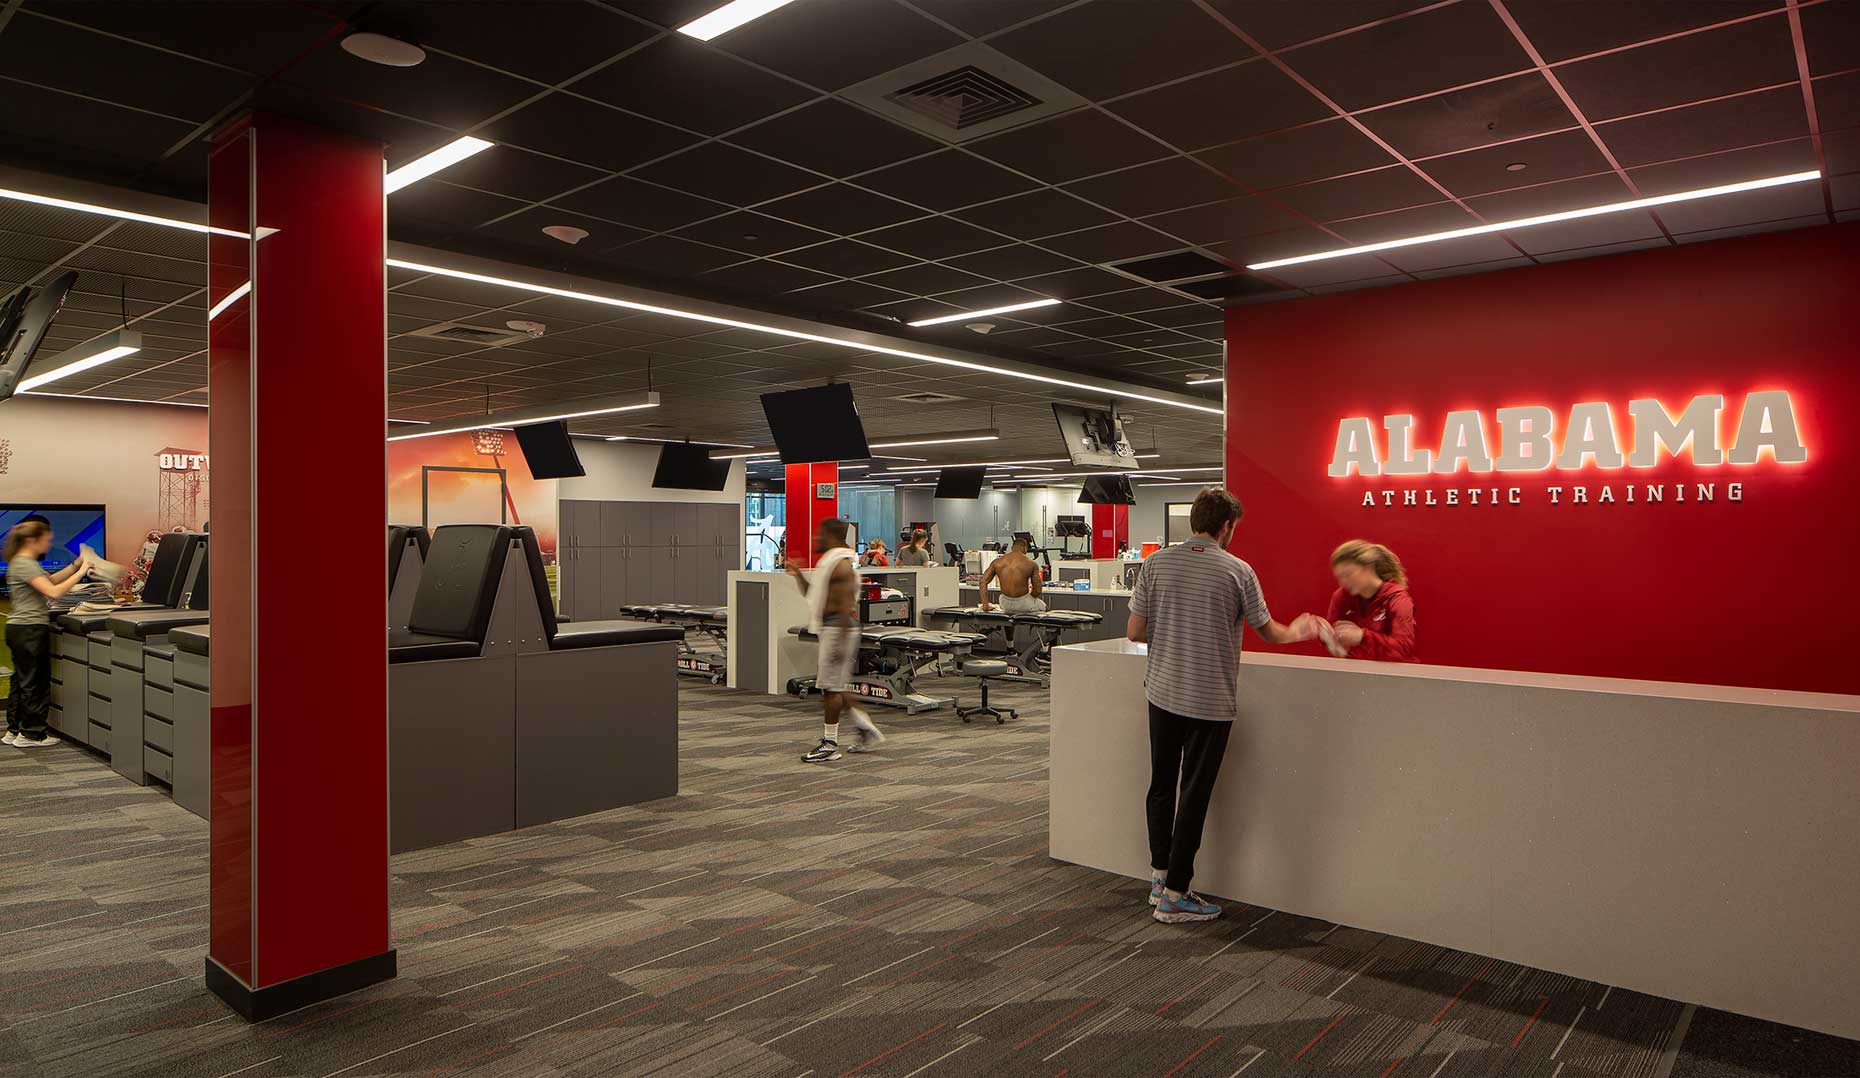 Trainers work on keeping student athletes healthy in the well-equipped Univ. of Alabama Athletic Training Facility